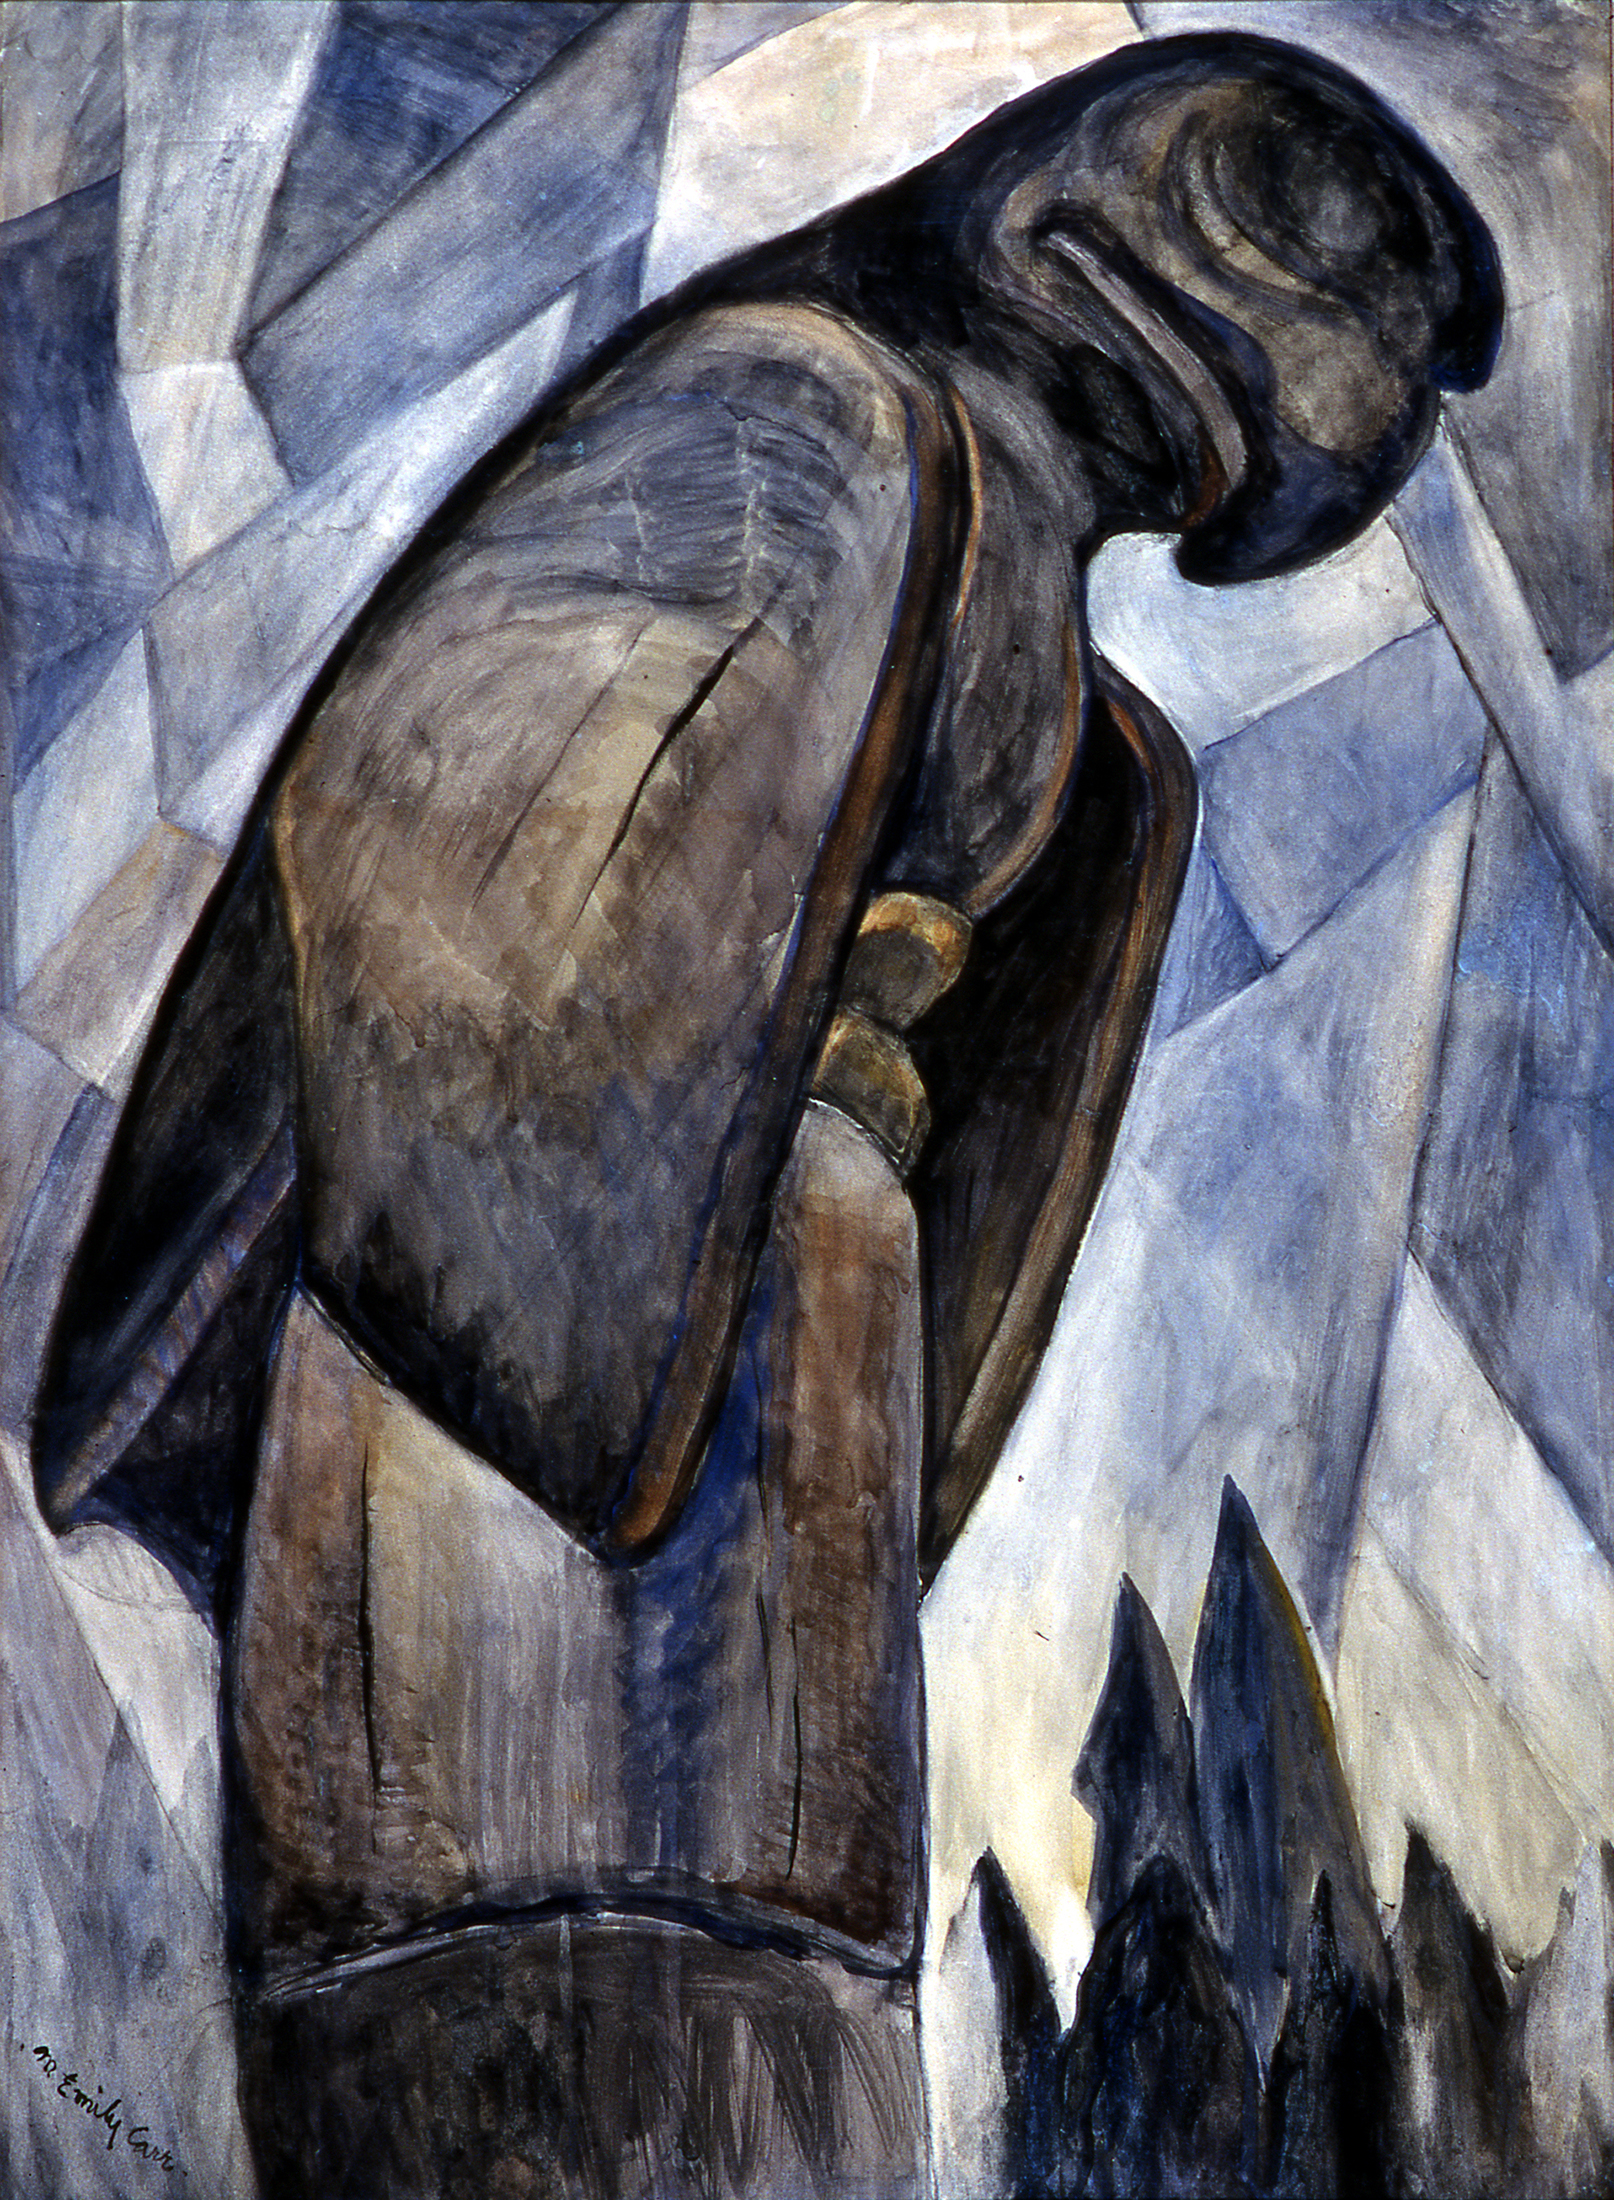 The Great Eagle, Skidegate, B.C: Painting by Emily Carr